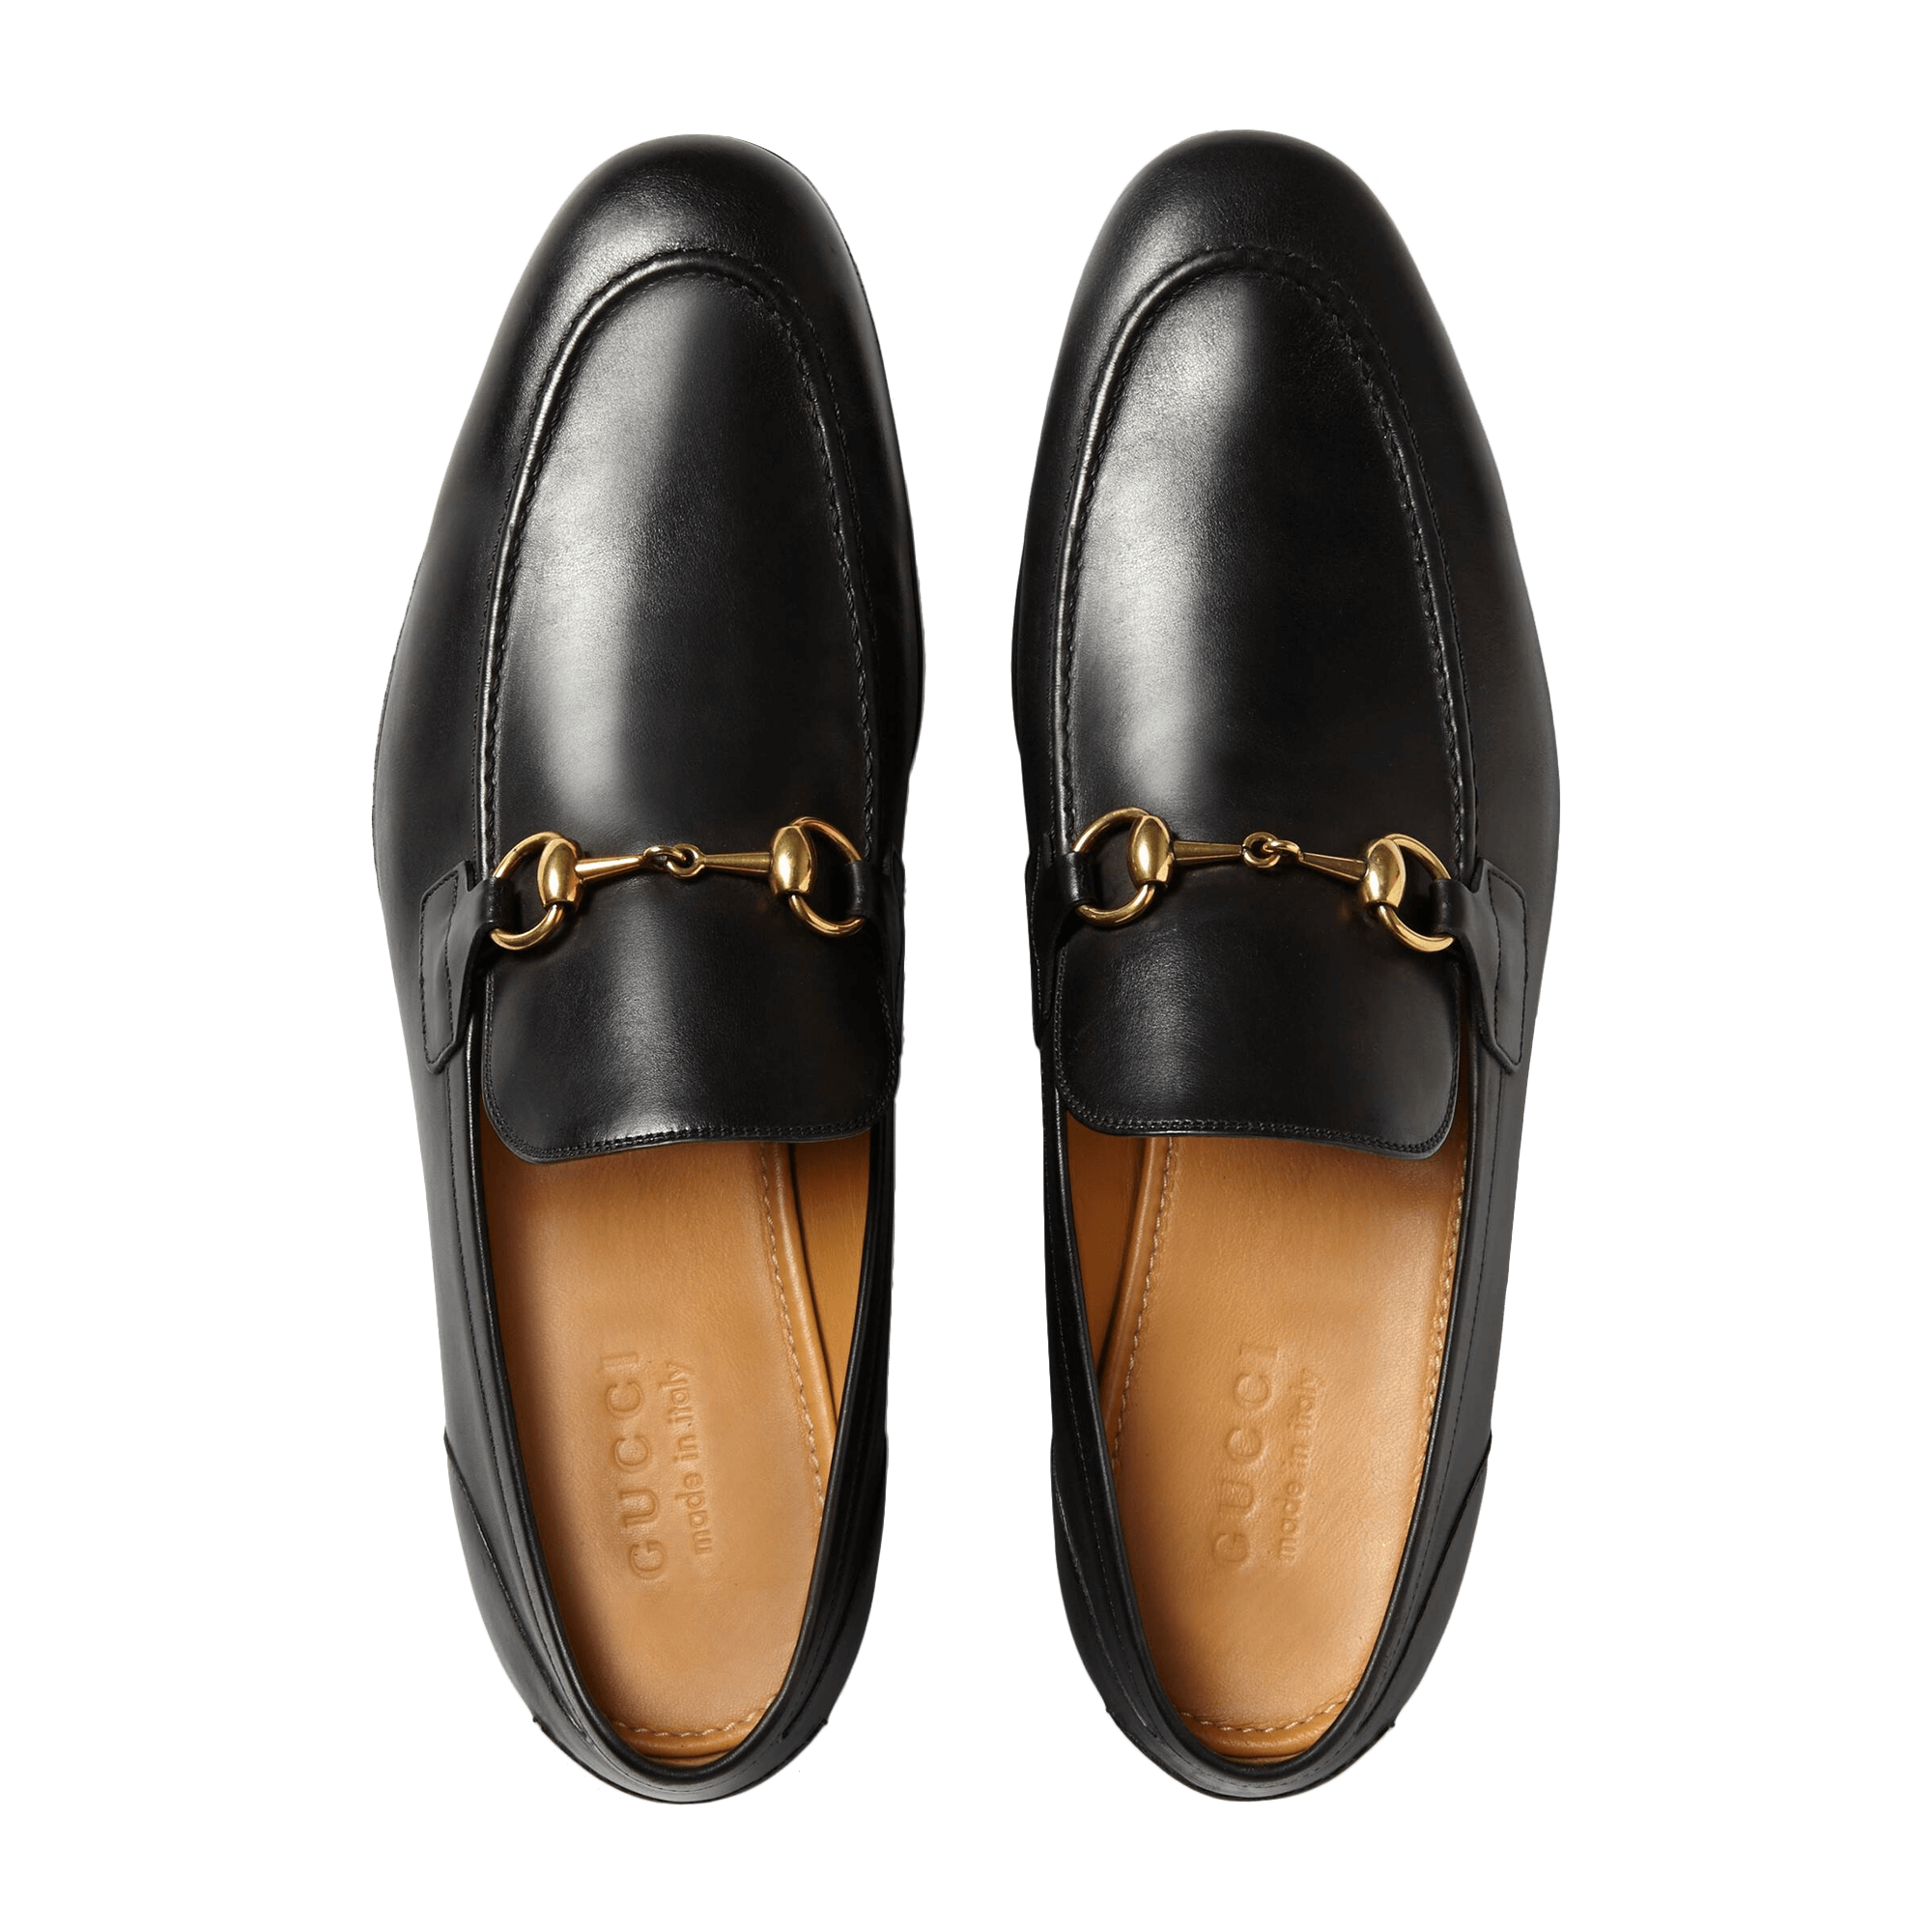 Gucci Jordaan Leather Loafer - Enigma Boutique